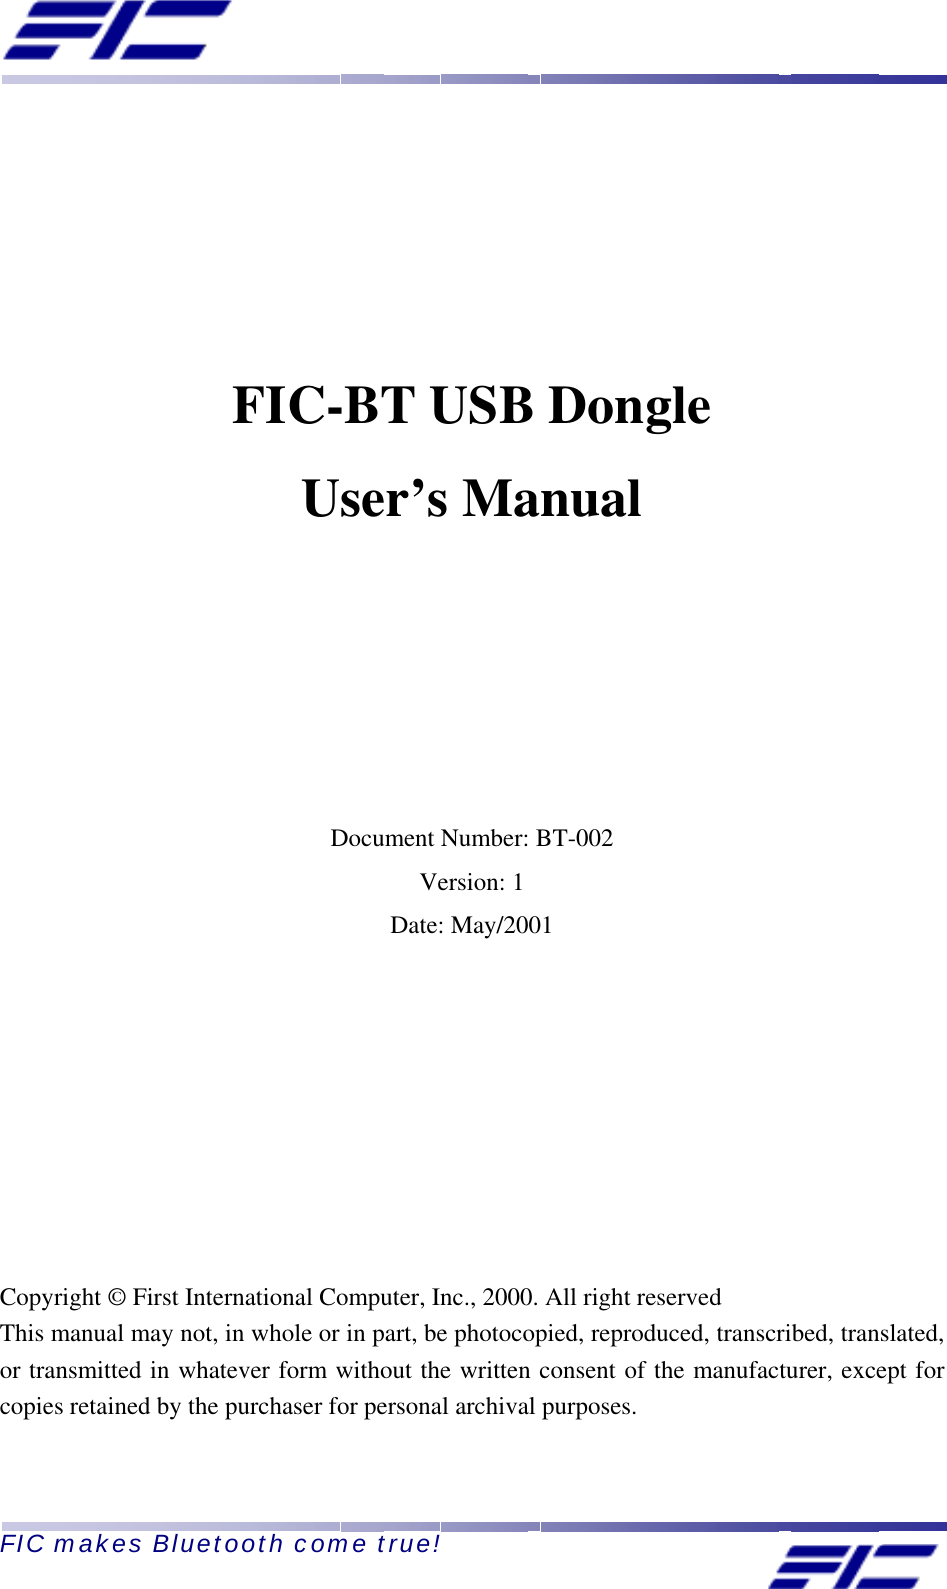  FIC makes Bluetooth come true!        FIC-BT USB Dongle User’s Manual        Document Number: BT-002 Version: 1 Date: May/2001         Copyright © First International Computer, Inc., 2000. All right reserved This manual may not, in whole or in part, be photocopied, reproduced, transcribed, translated, or transmitted in whatever form without the written consent of the manufacturer, except for copies retained by the purchaser for personal archival purposes. 